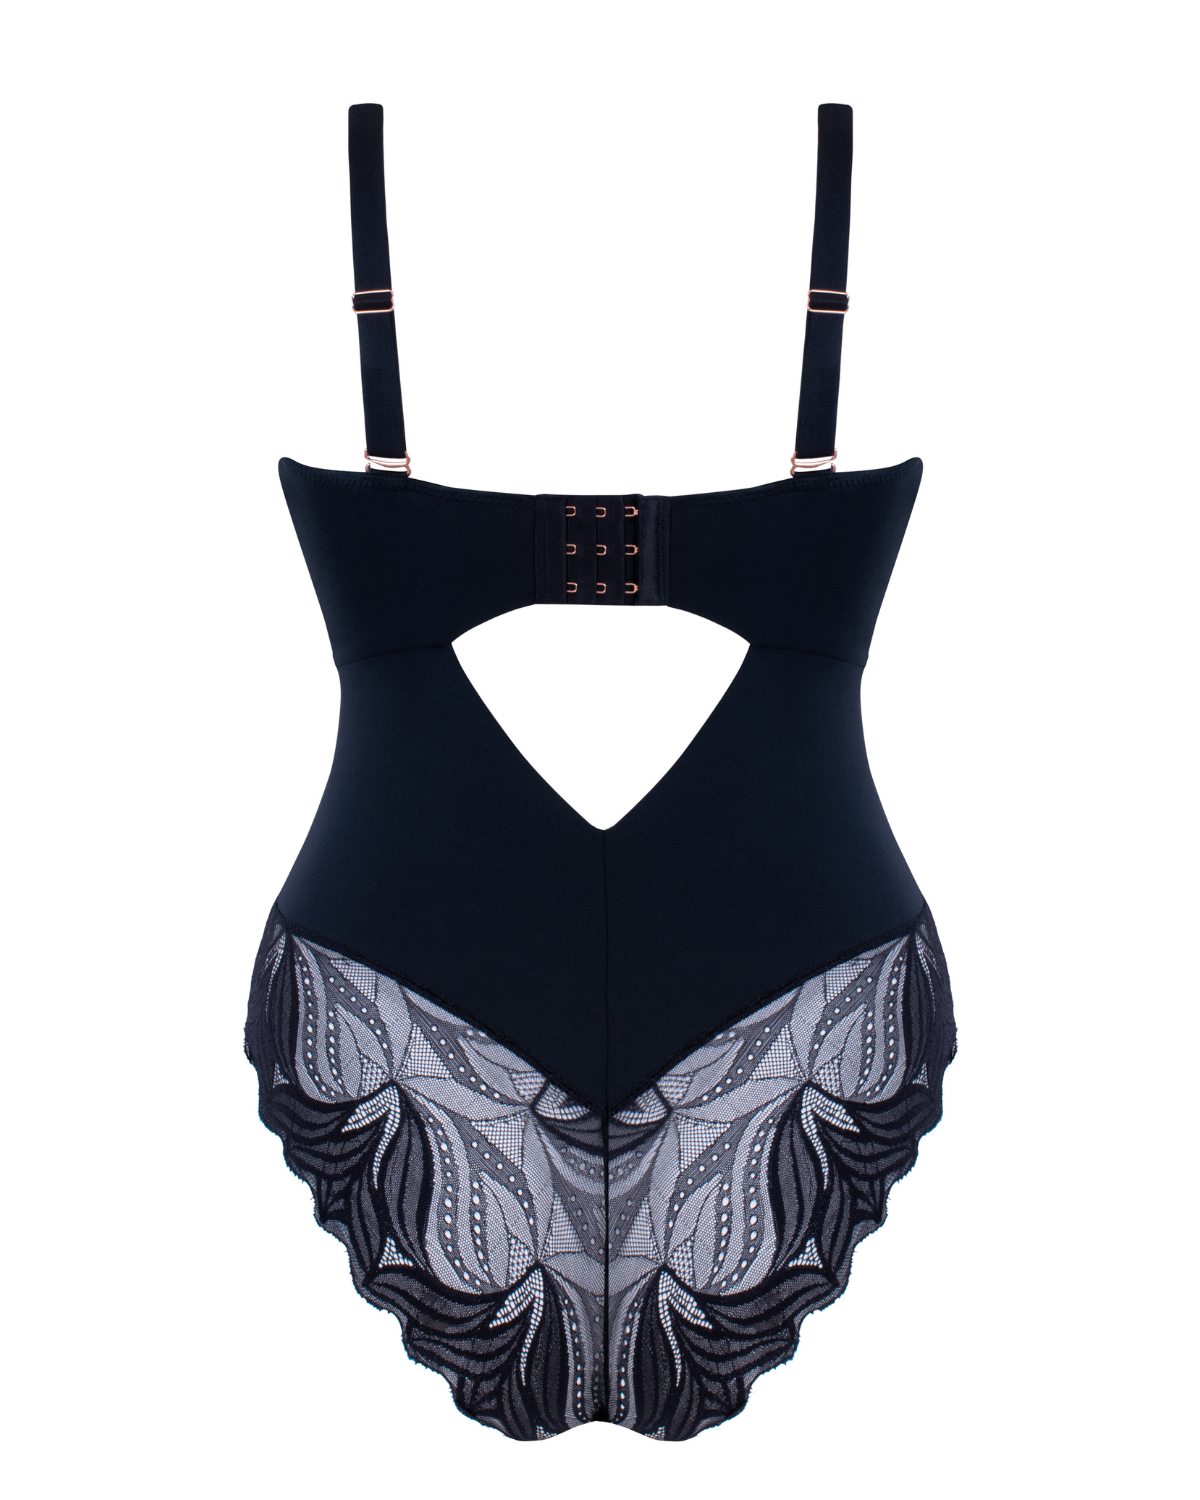 Flat lay of a high neck bodysuit with keyhole detail in black